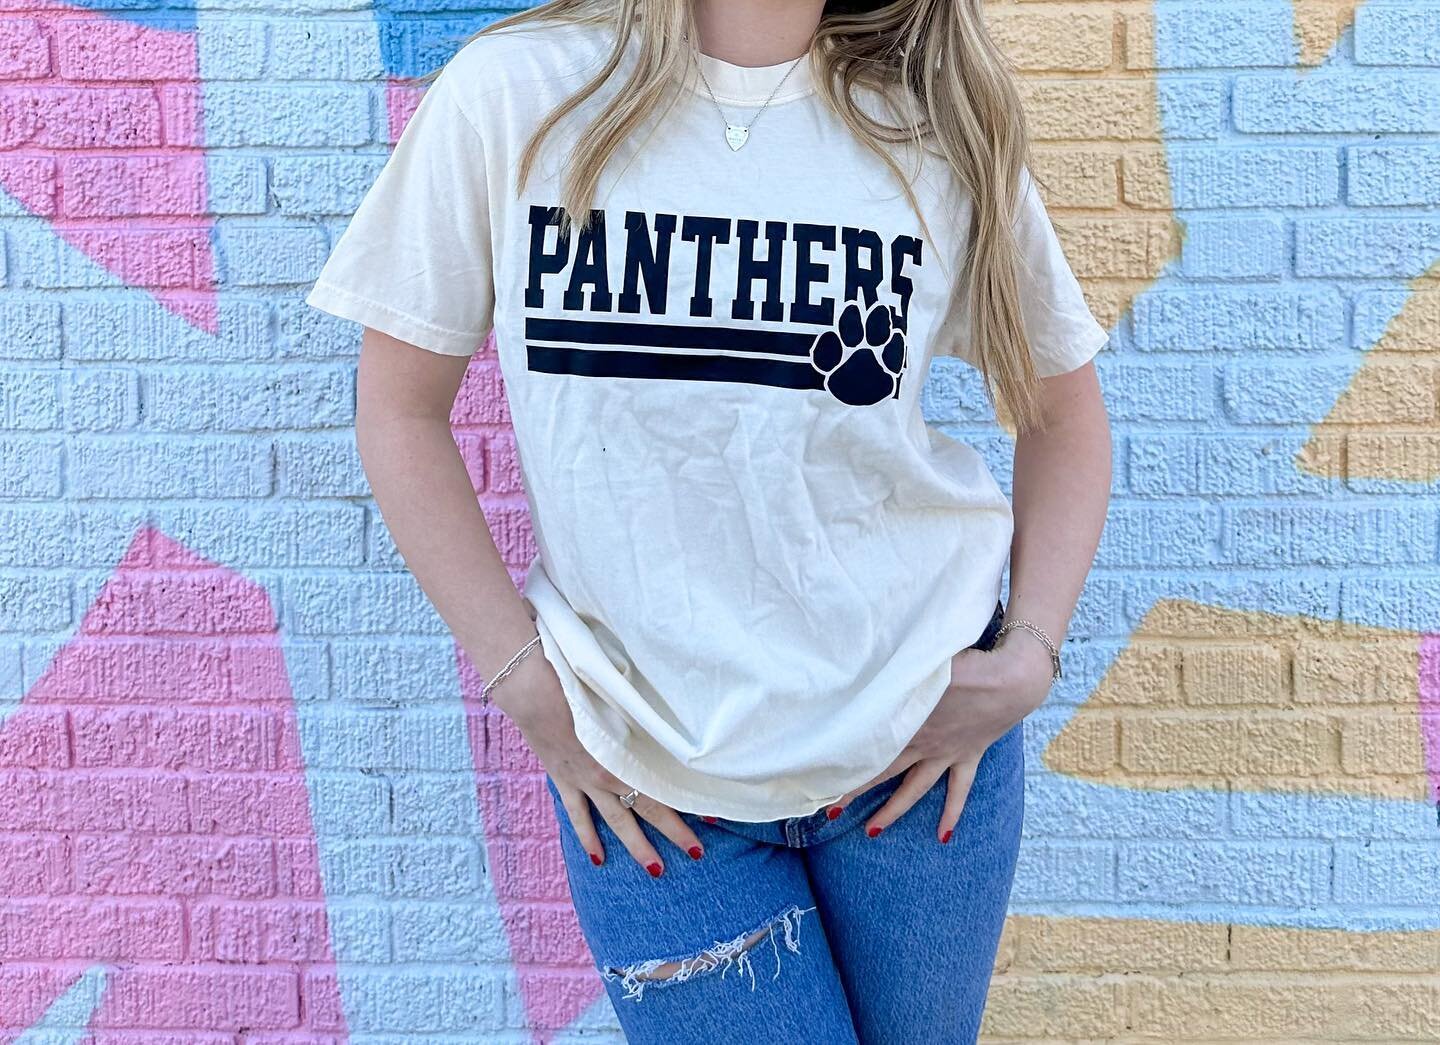 panthers top🐾🪩

-available in gilden, comfort colors(pictured),&amp; bella canvas

-long sleeve, short sleeve, or crewneck 

-any color! 

short sleeve T-shirt-$20
long sleeve shirt-$25
crewneck-$35

#smallbusiness #shopsmall #shoplocal #oklahoma #